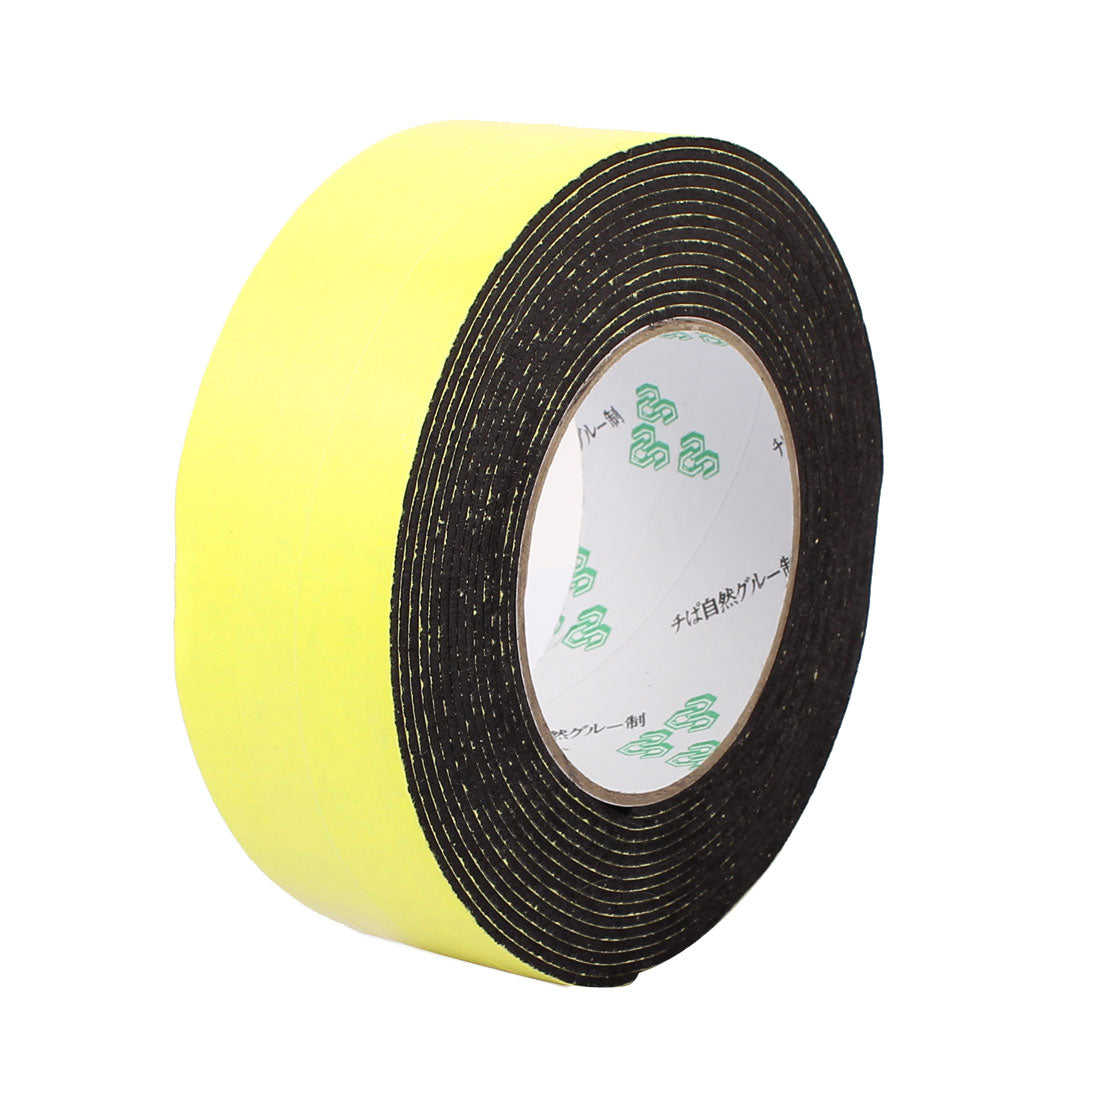 uxcell Uxcell 45mm x 2mm Single Sided Self Adhesive Shockproof Sponge Foam Tape 5M Length